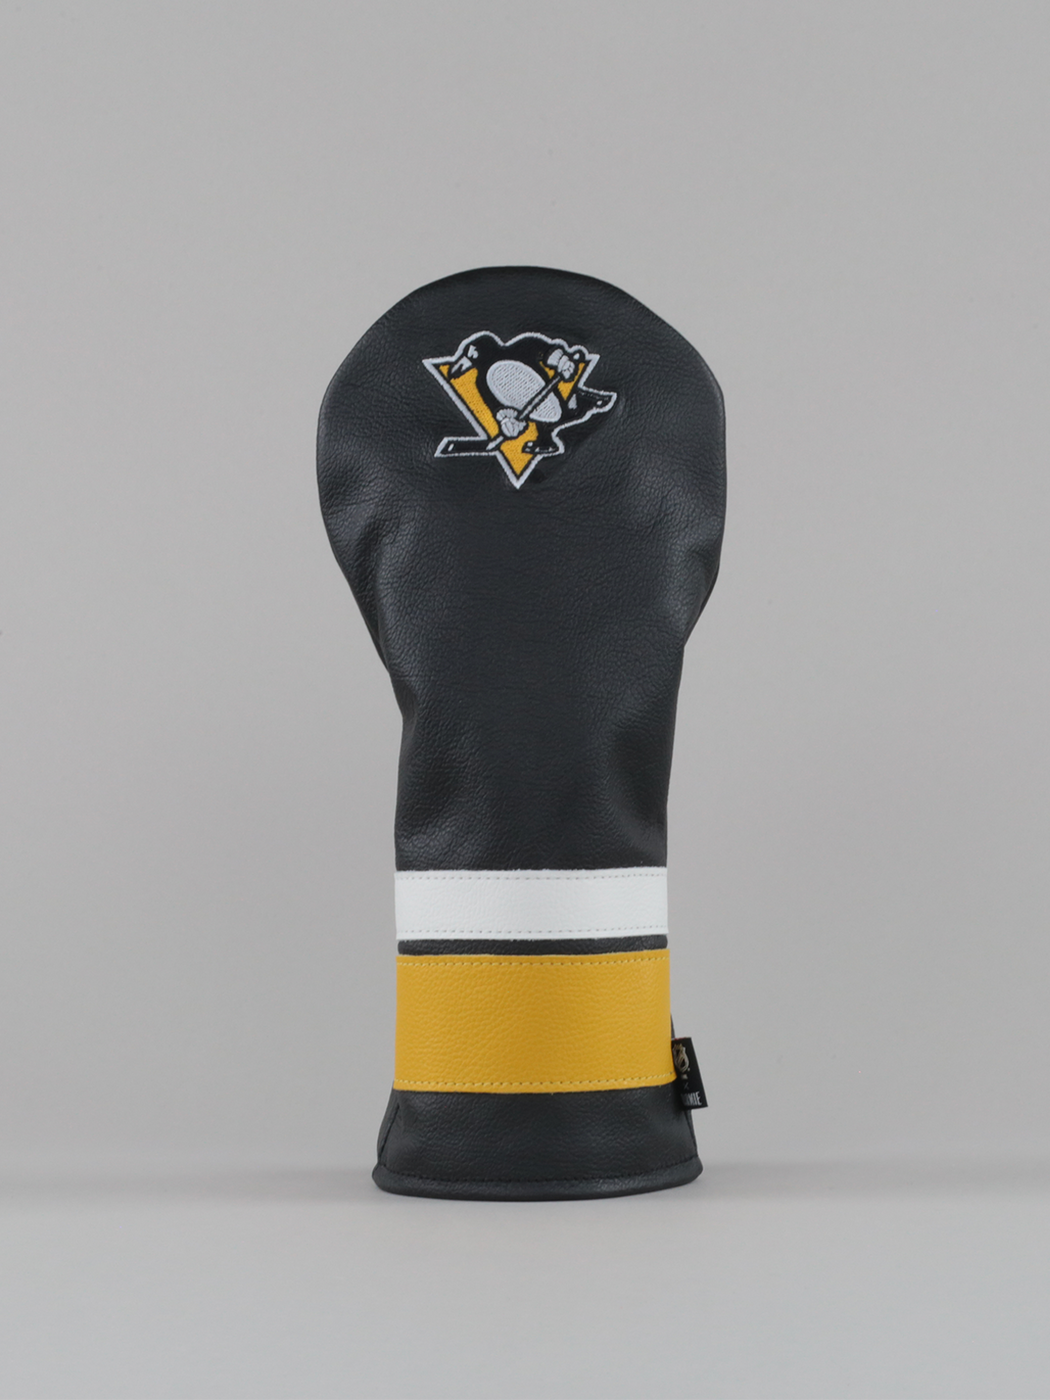 Pittsburgh Penguins Equipment Review